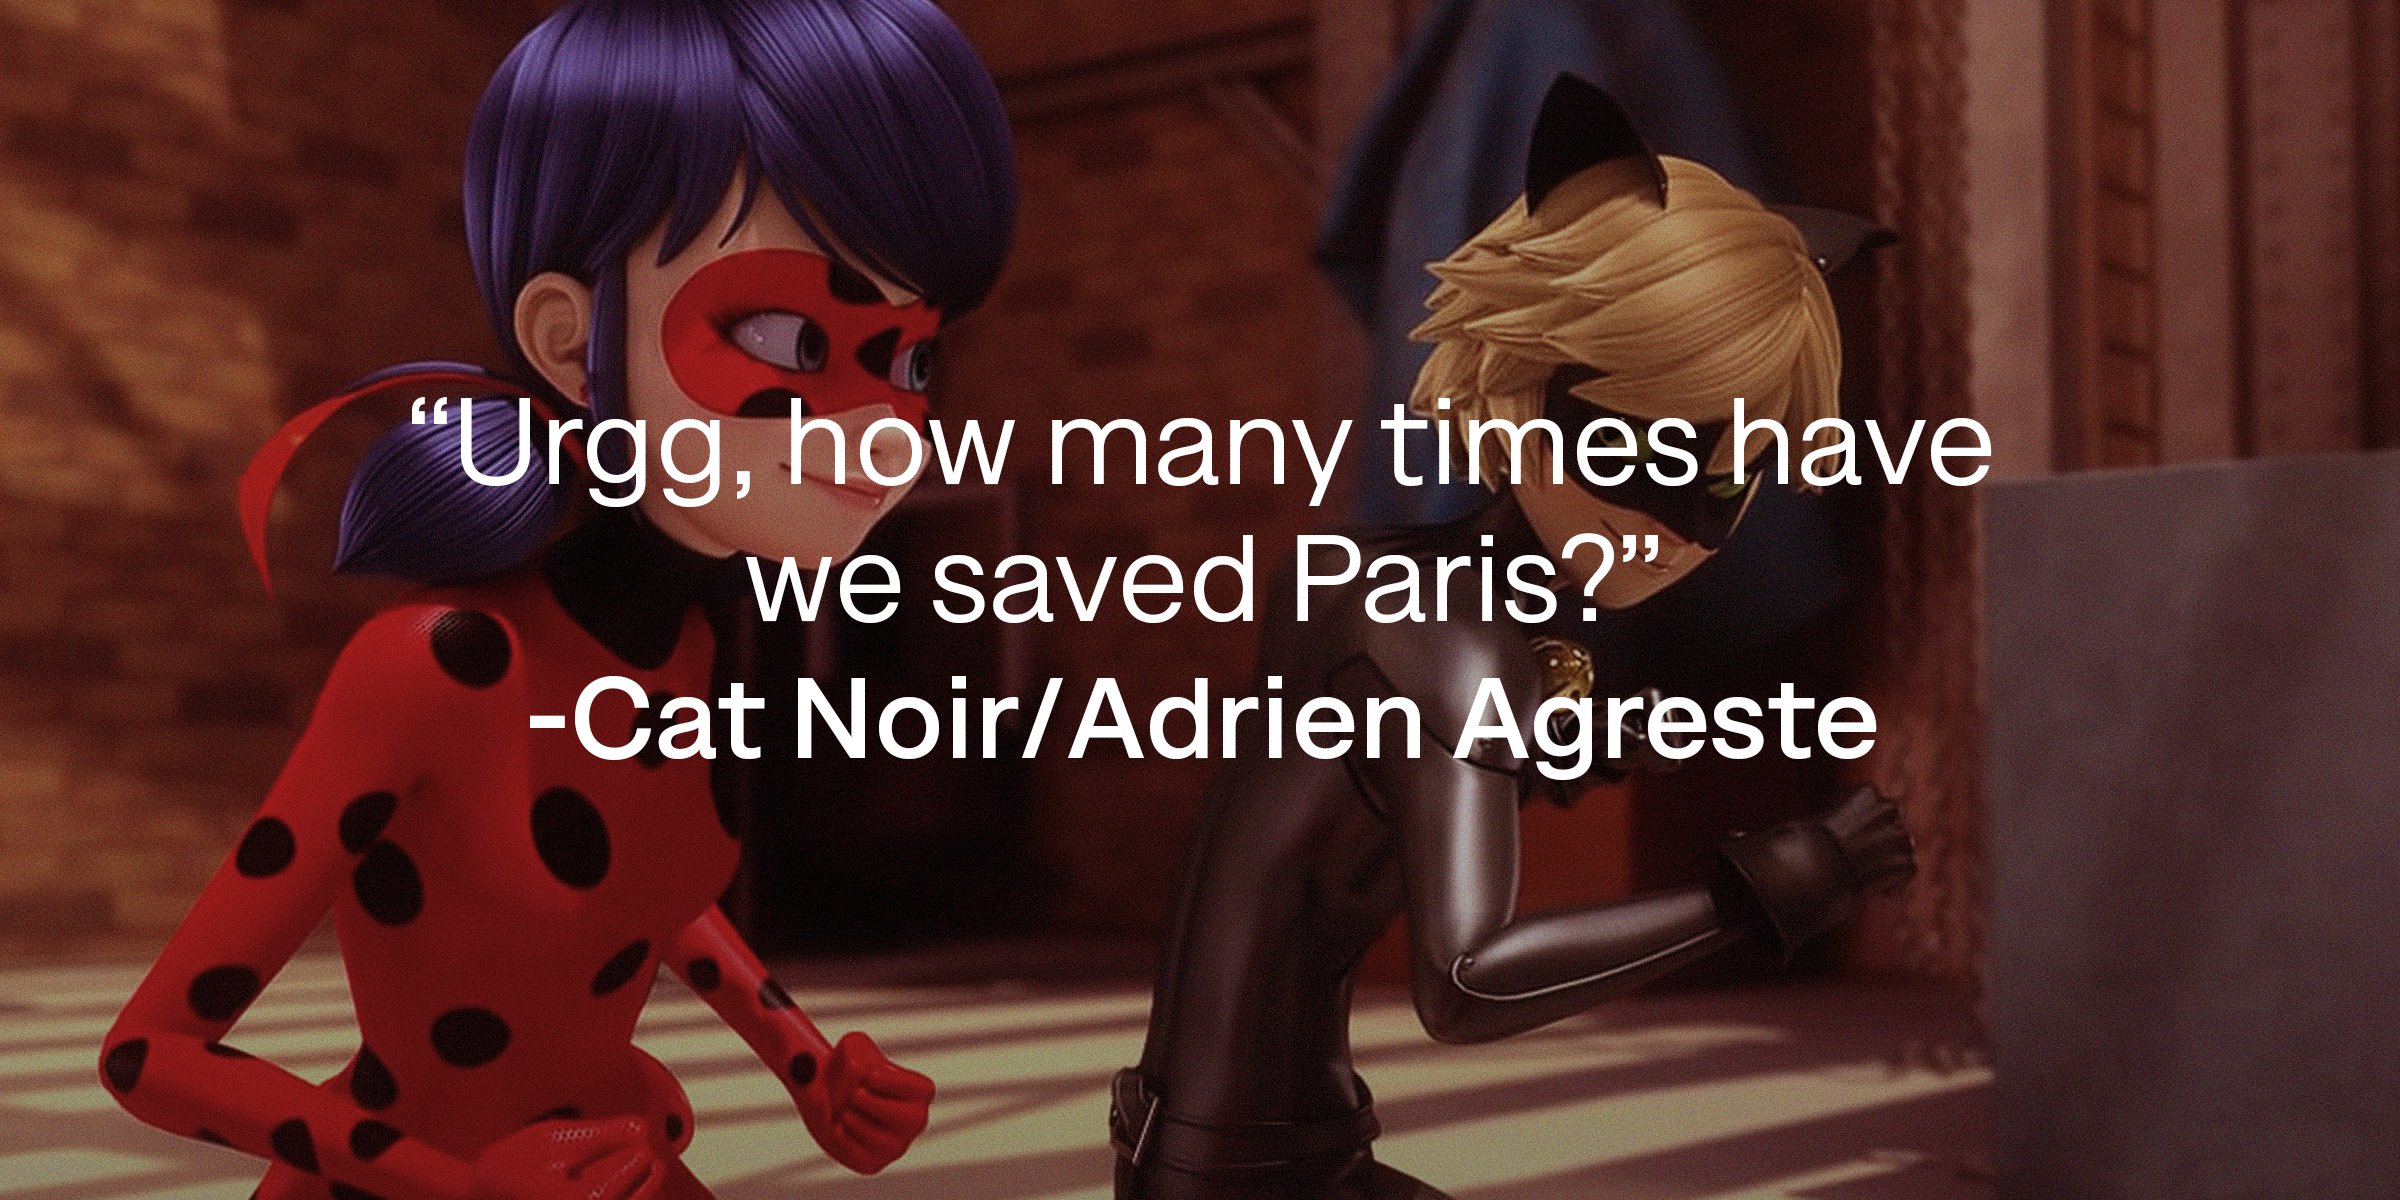 Source: youtube.com/Miraculous Ladybug | Miraculous LadyBug and Cat Noir with a quote by Cat Noir reading, “Urgg, how many times have we saved Paris?”